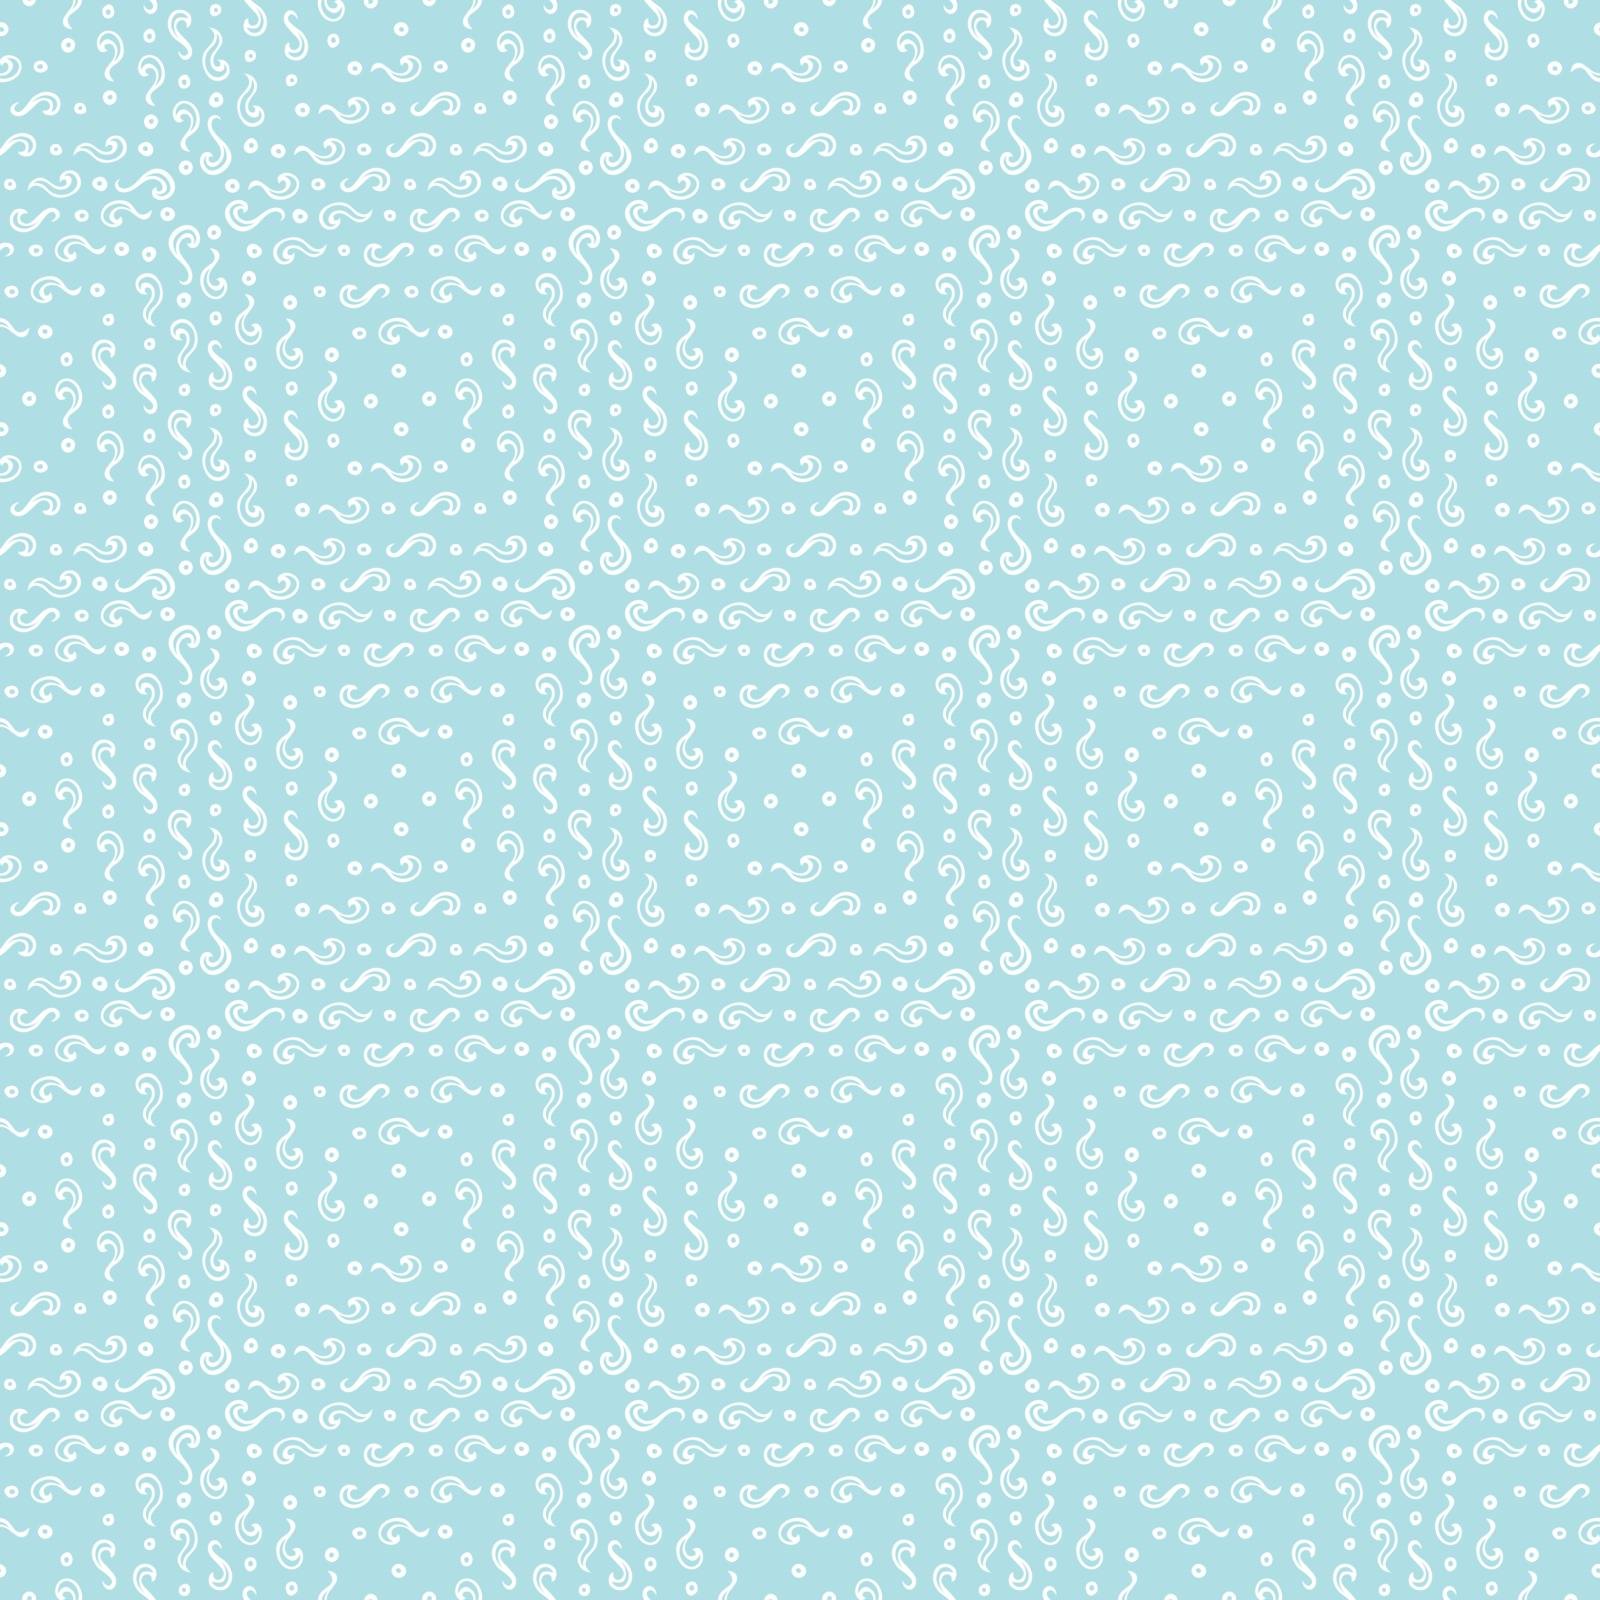 Seamless illustrated pattern made of abstract white elements on turquoise